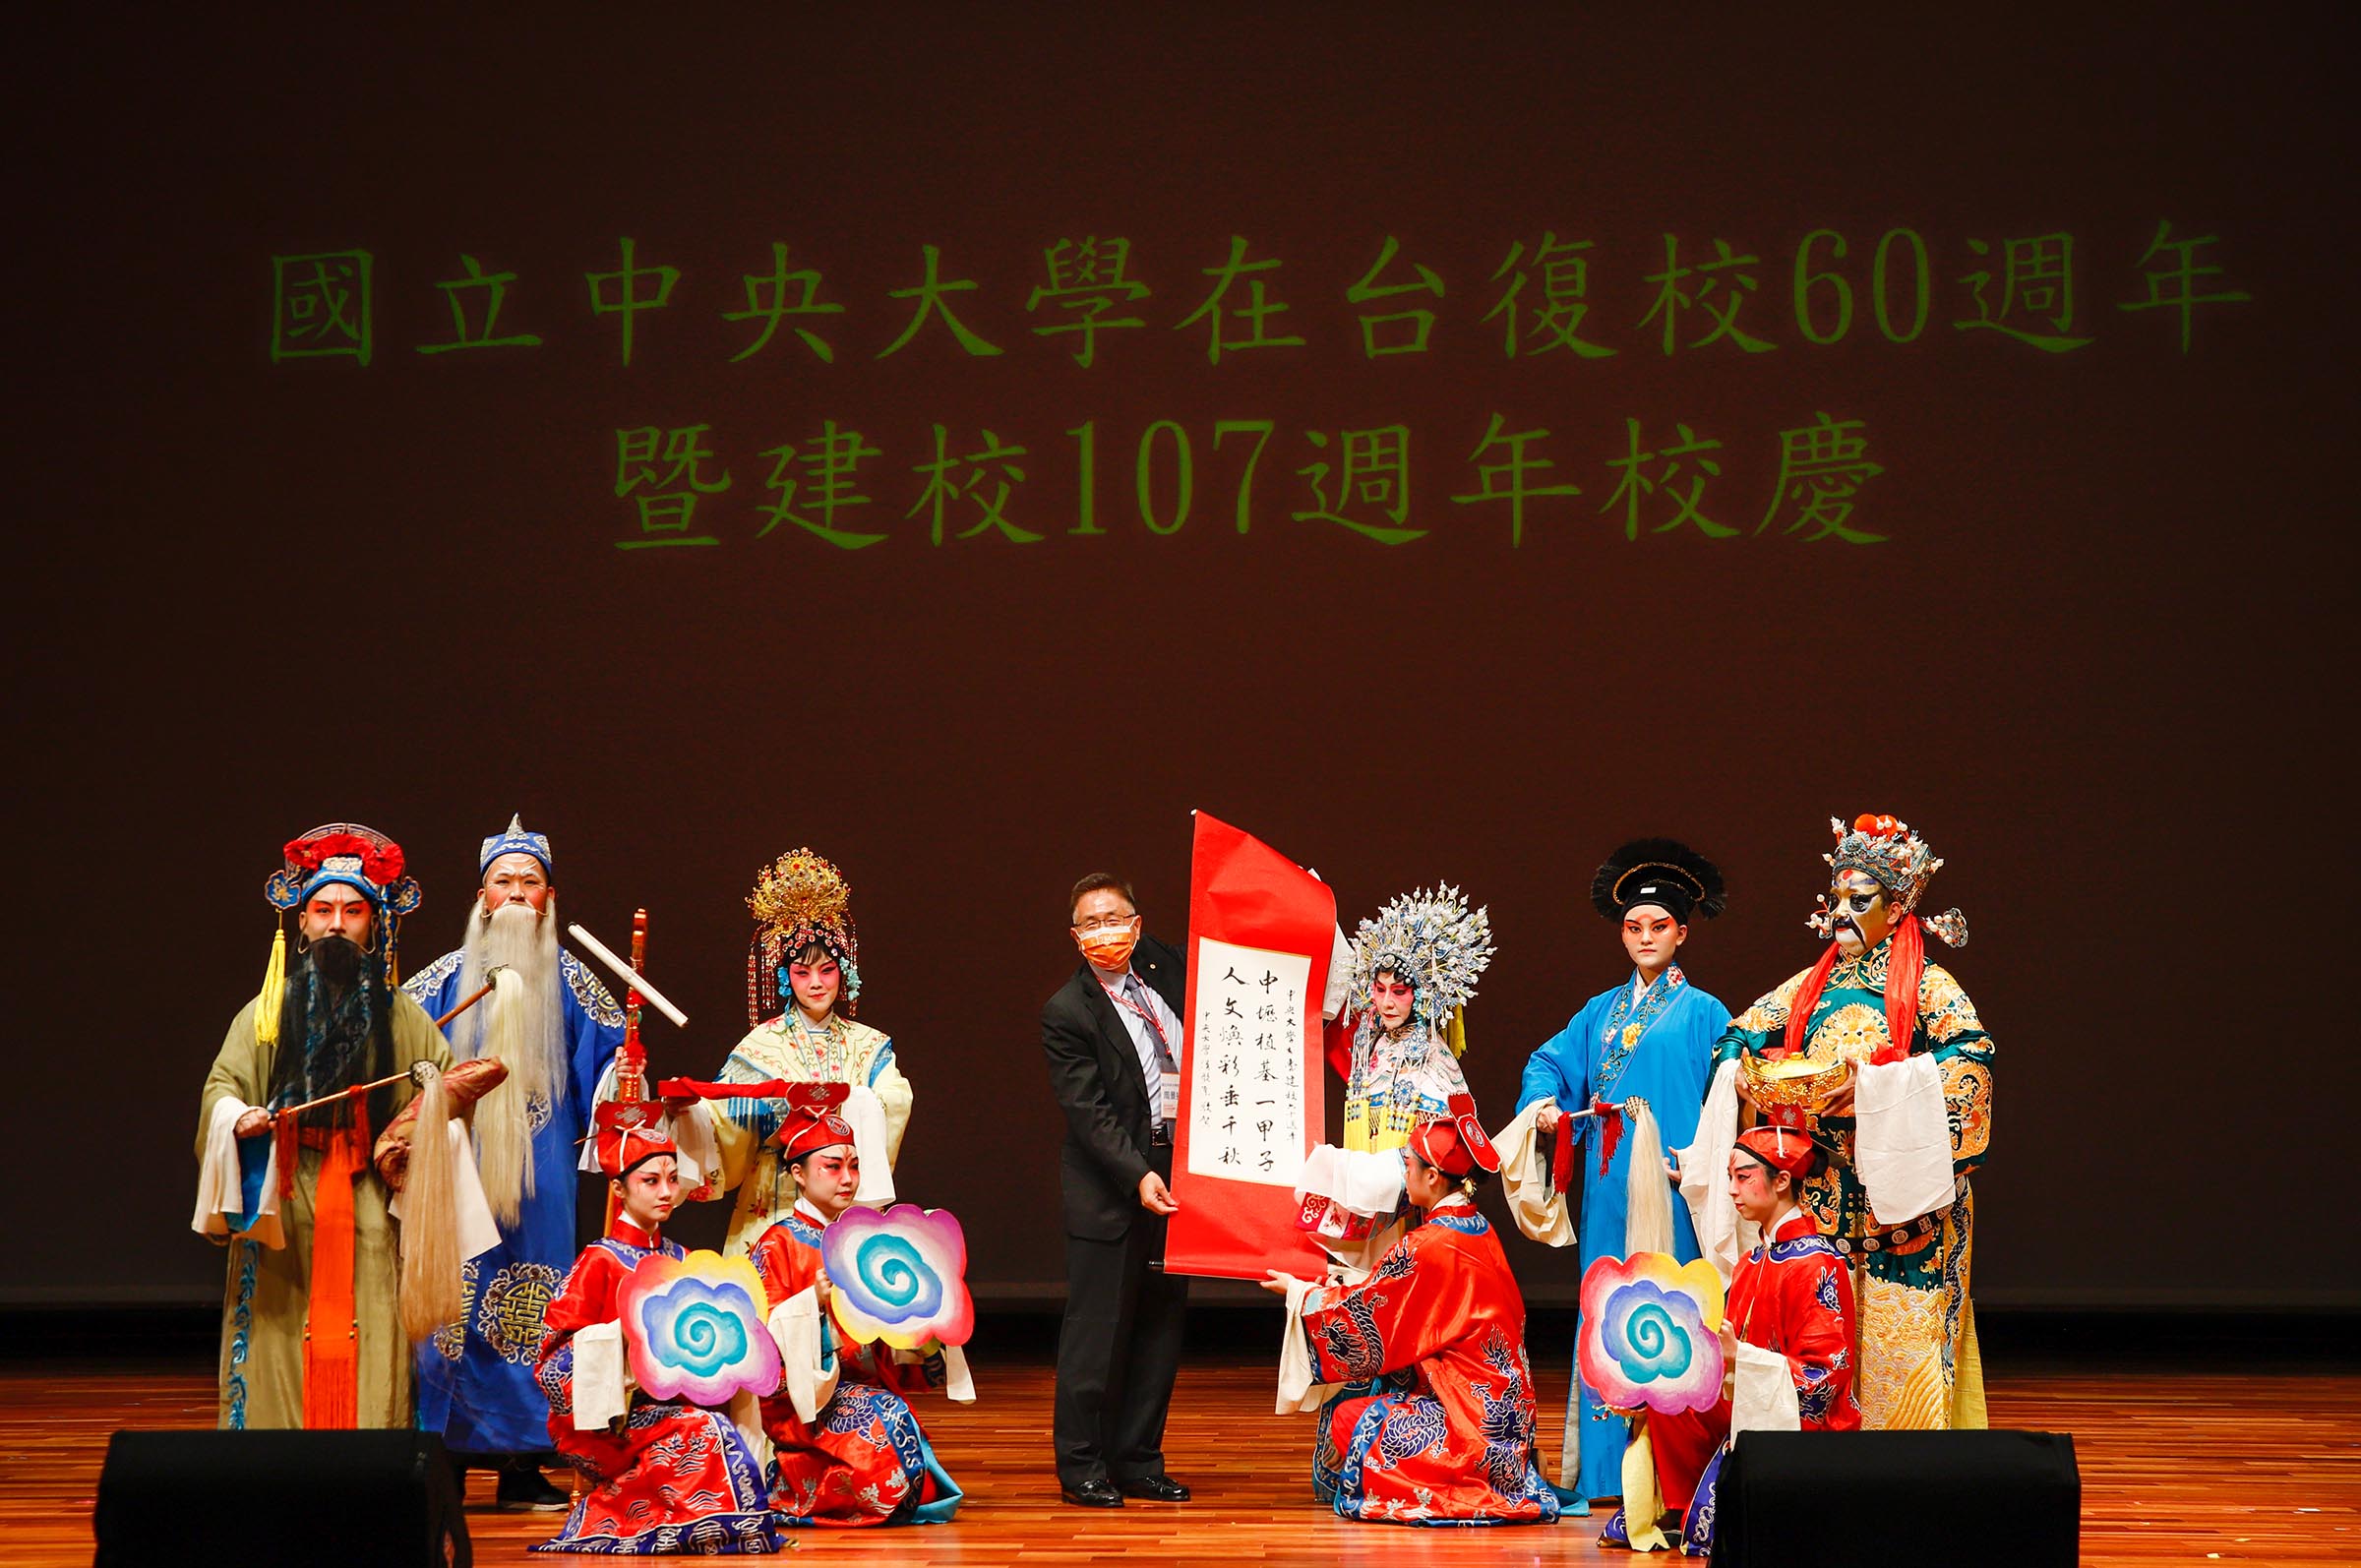 NCU Peking Opera Society unveiled the ceremony with opera performance “A Great Blessing,” celebrating NCU’s 60th anniversary of re-establishment in Taiwan and wishing NCU future prosperity. Photo: Lai Lu-Yun